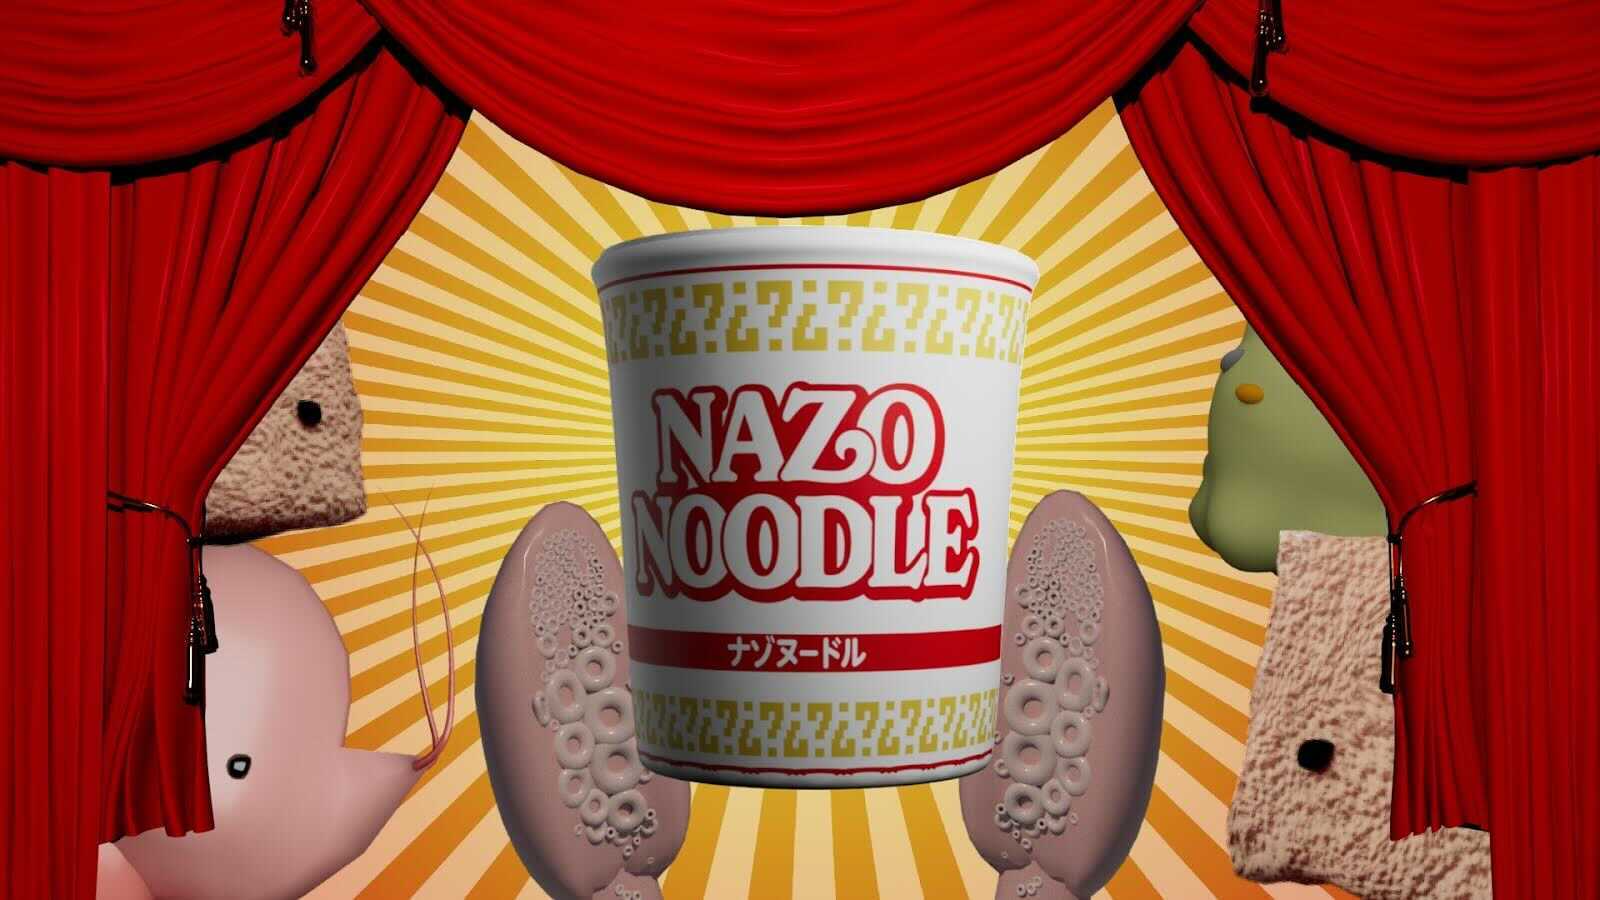 Story of Noodle